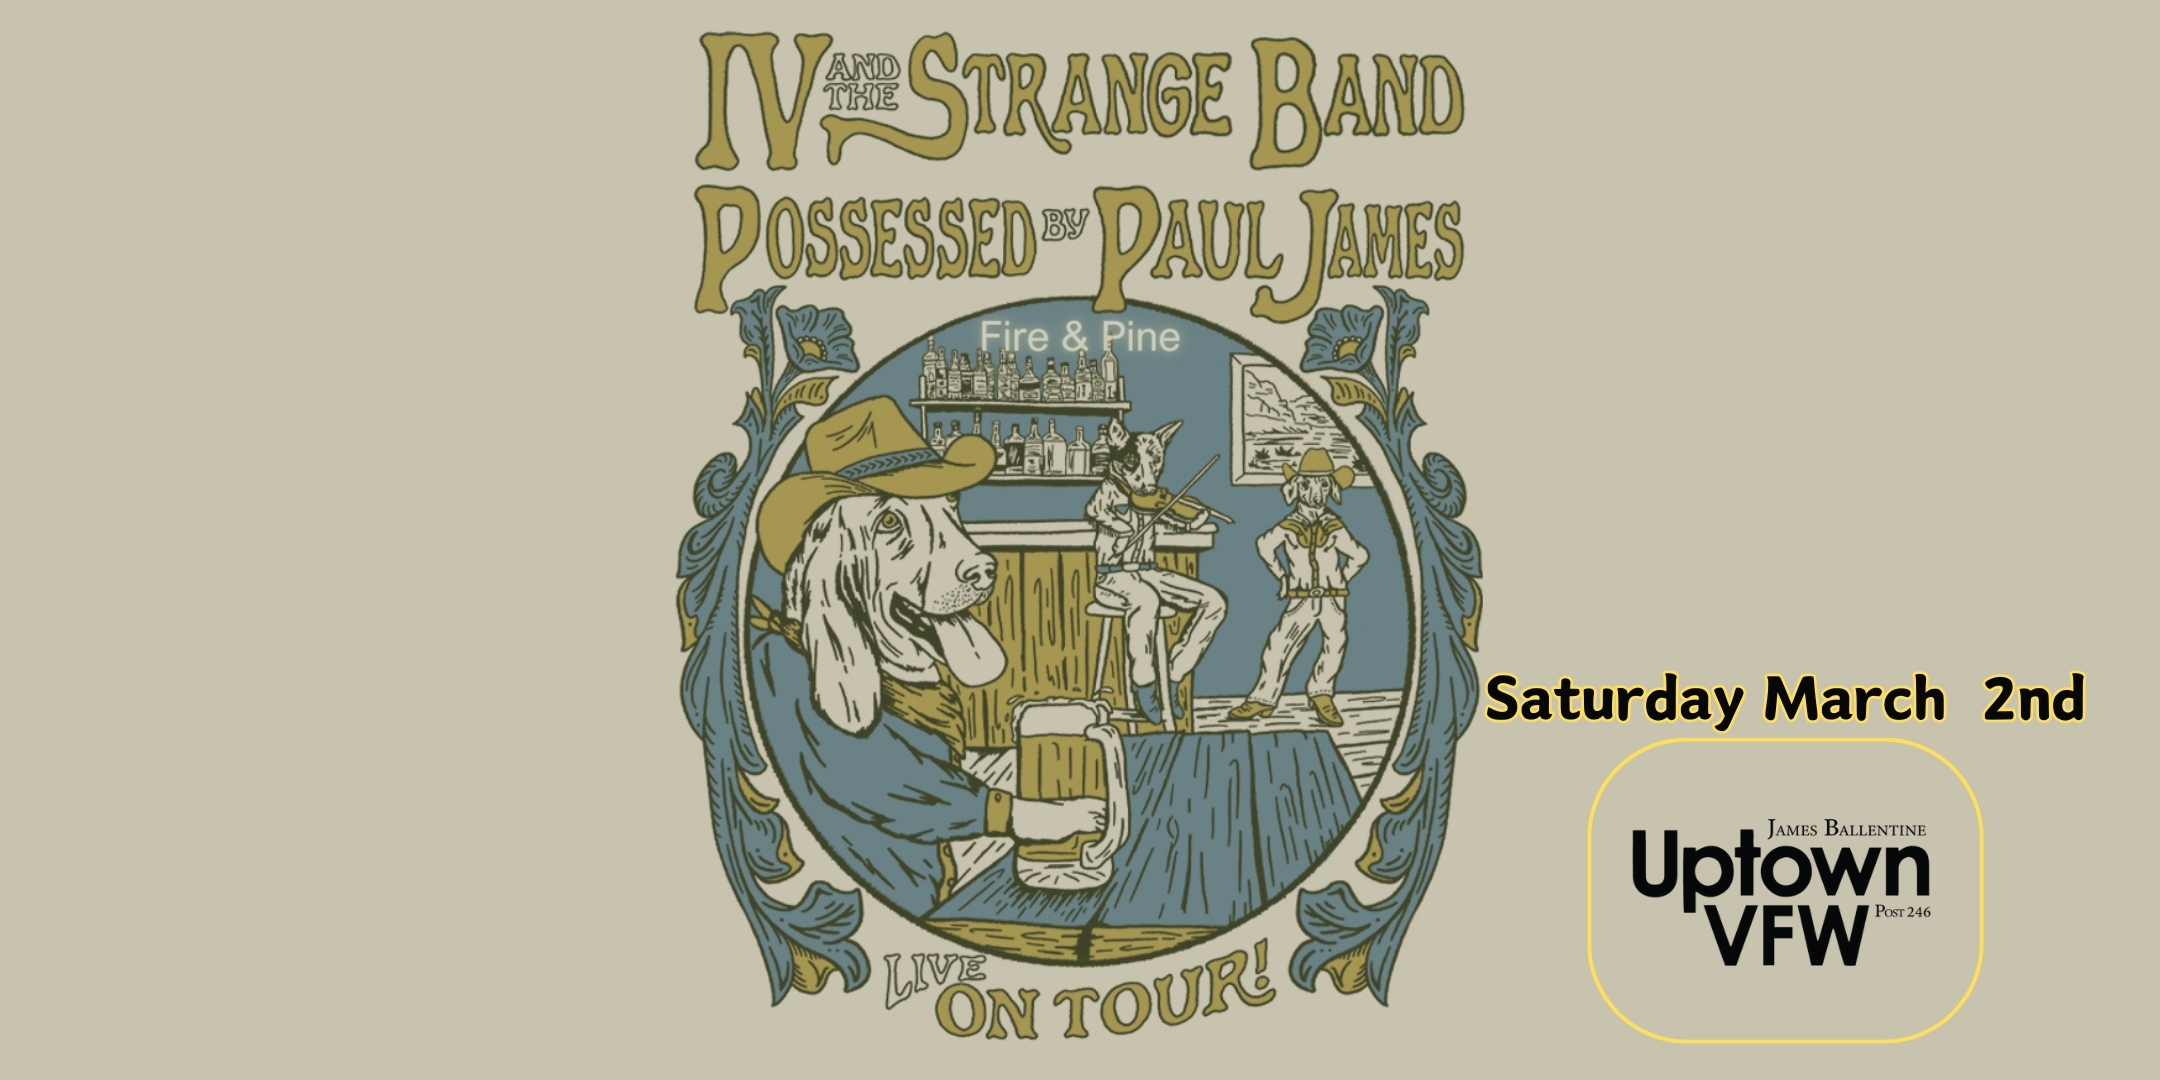 IV and The Strange Band Possessed By Paul James Fire & Pine Saturday, March 2 James Ballentine "Uptown" VFW Post 246 Doors 7:30pm :: Music 8:00pm :: 21+ $15 ADV / $20 DOS TICKETS ON SALE NOW